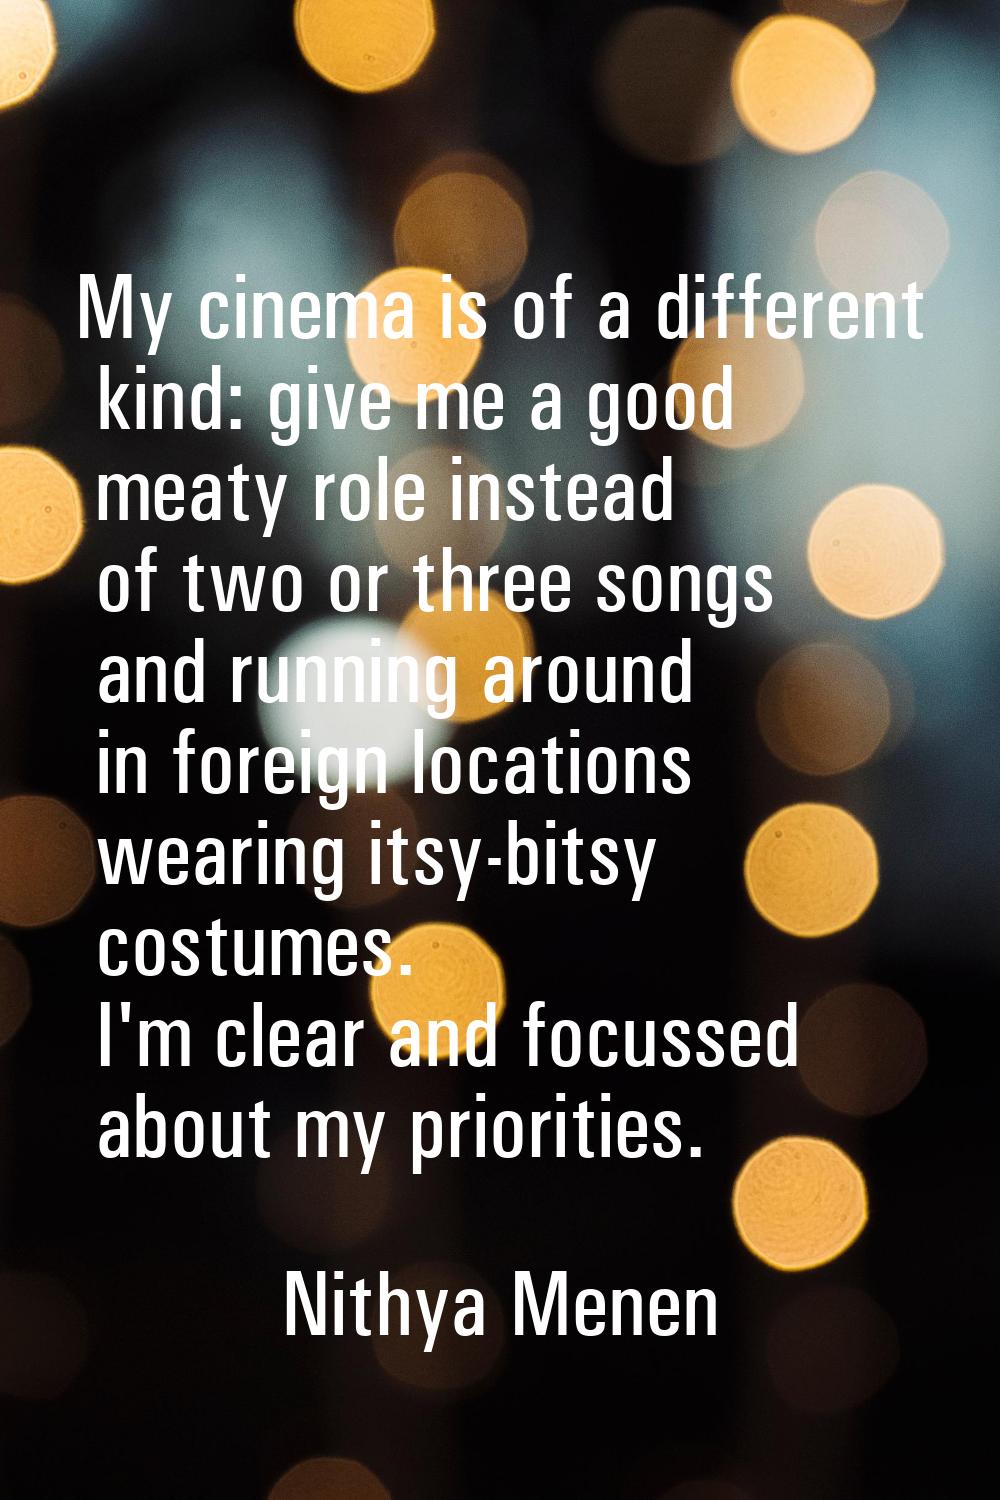 My cinema is of a different kind: give me a good meaty role instead of two or three songs and runni